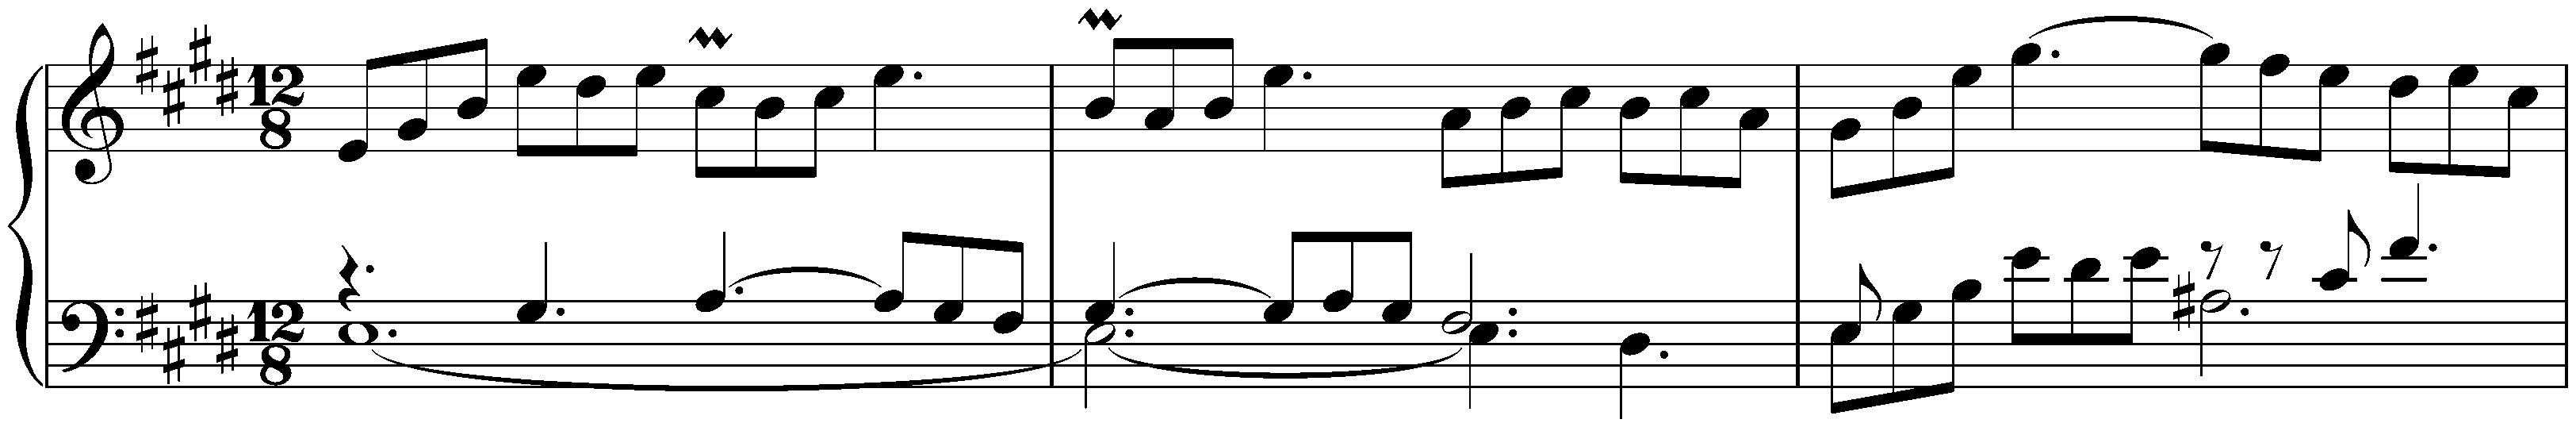 The Well-Tempered Clavier, Book 1, BWV 846–869; 9. E major, BWV 854, Prelude